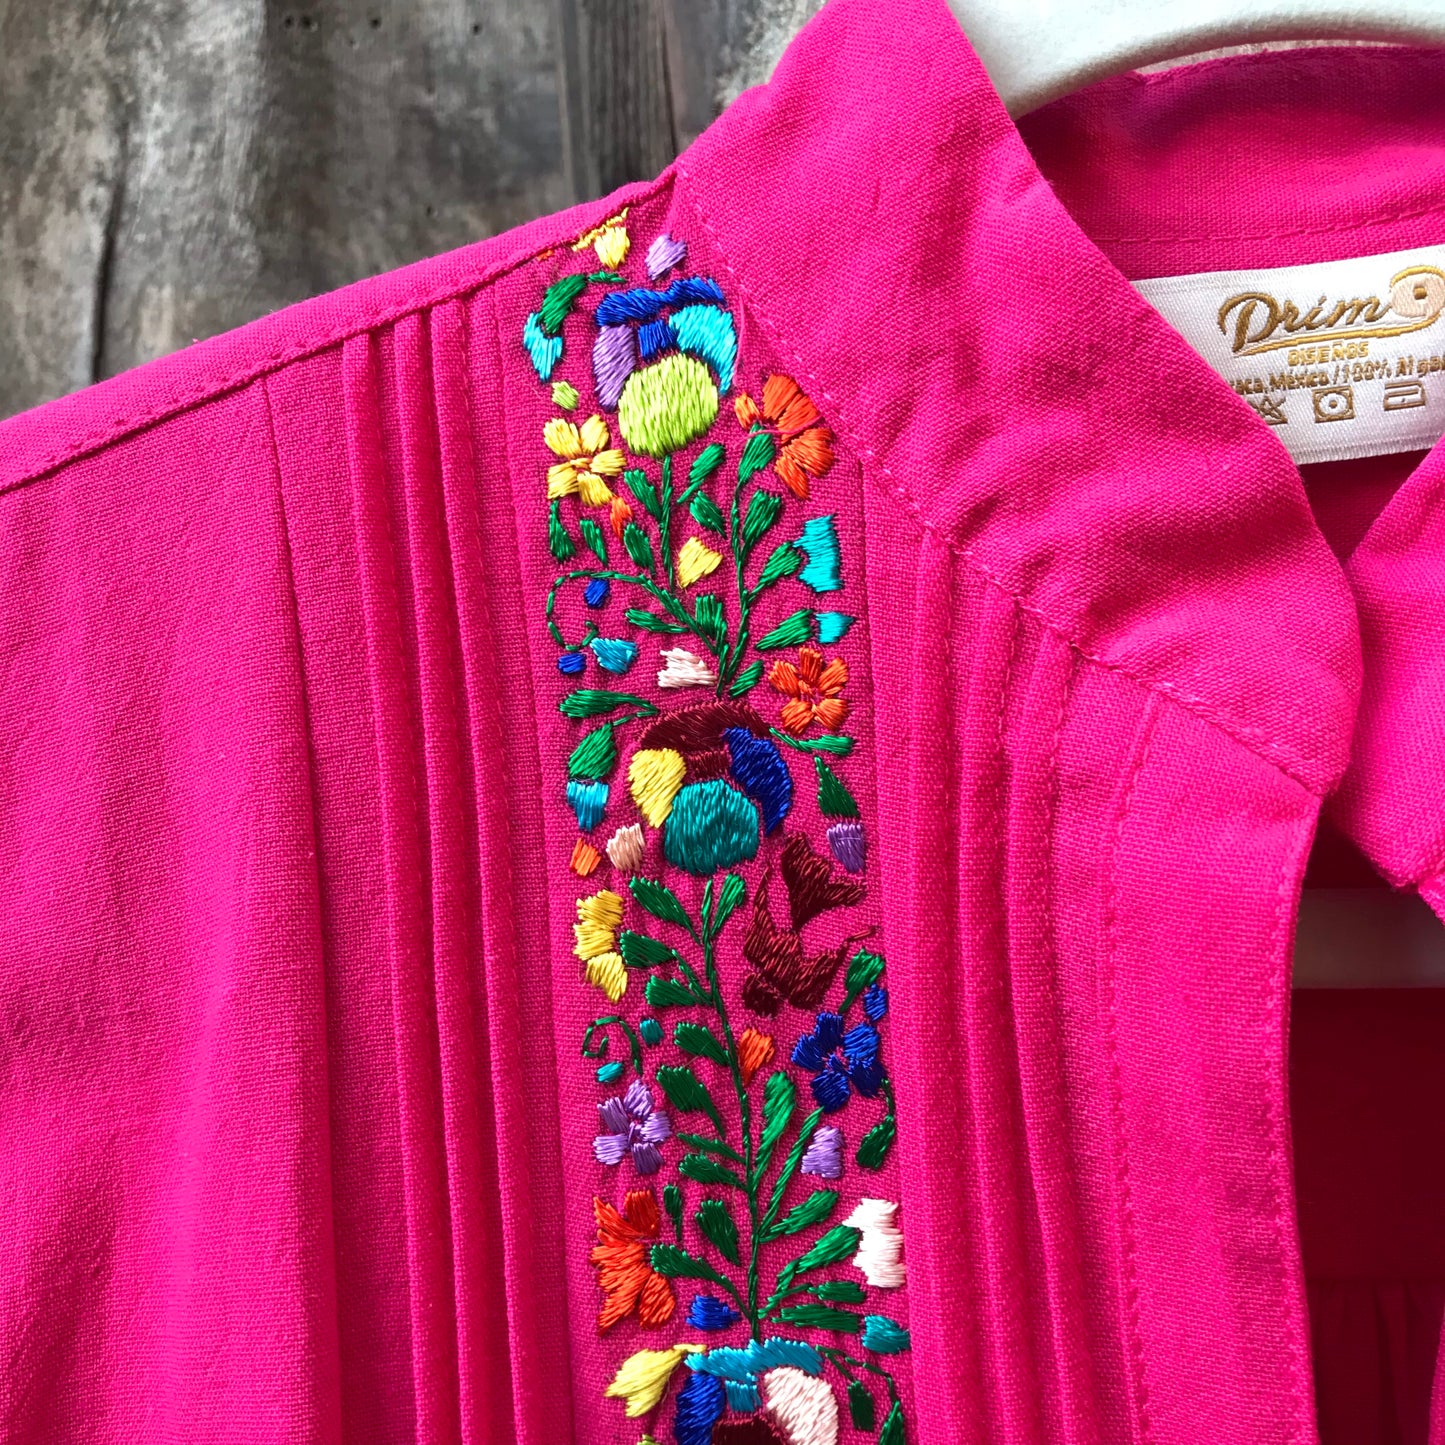 Women’s Embroidered Button-Down in Pink